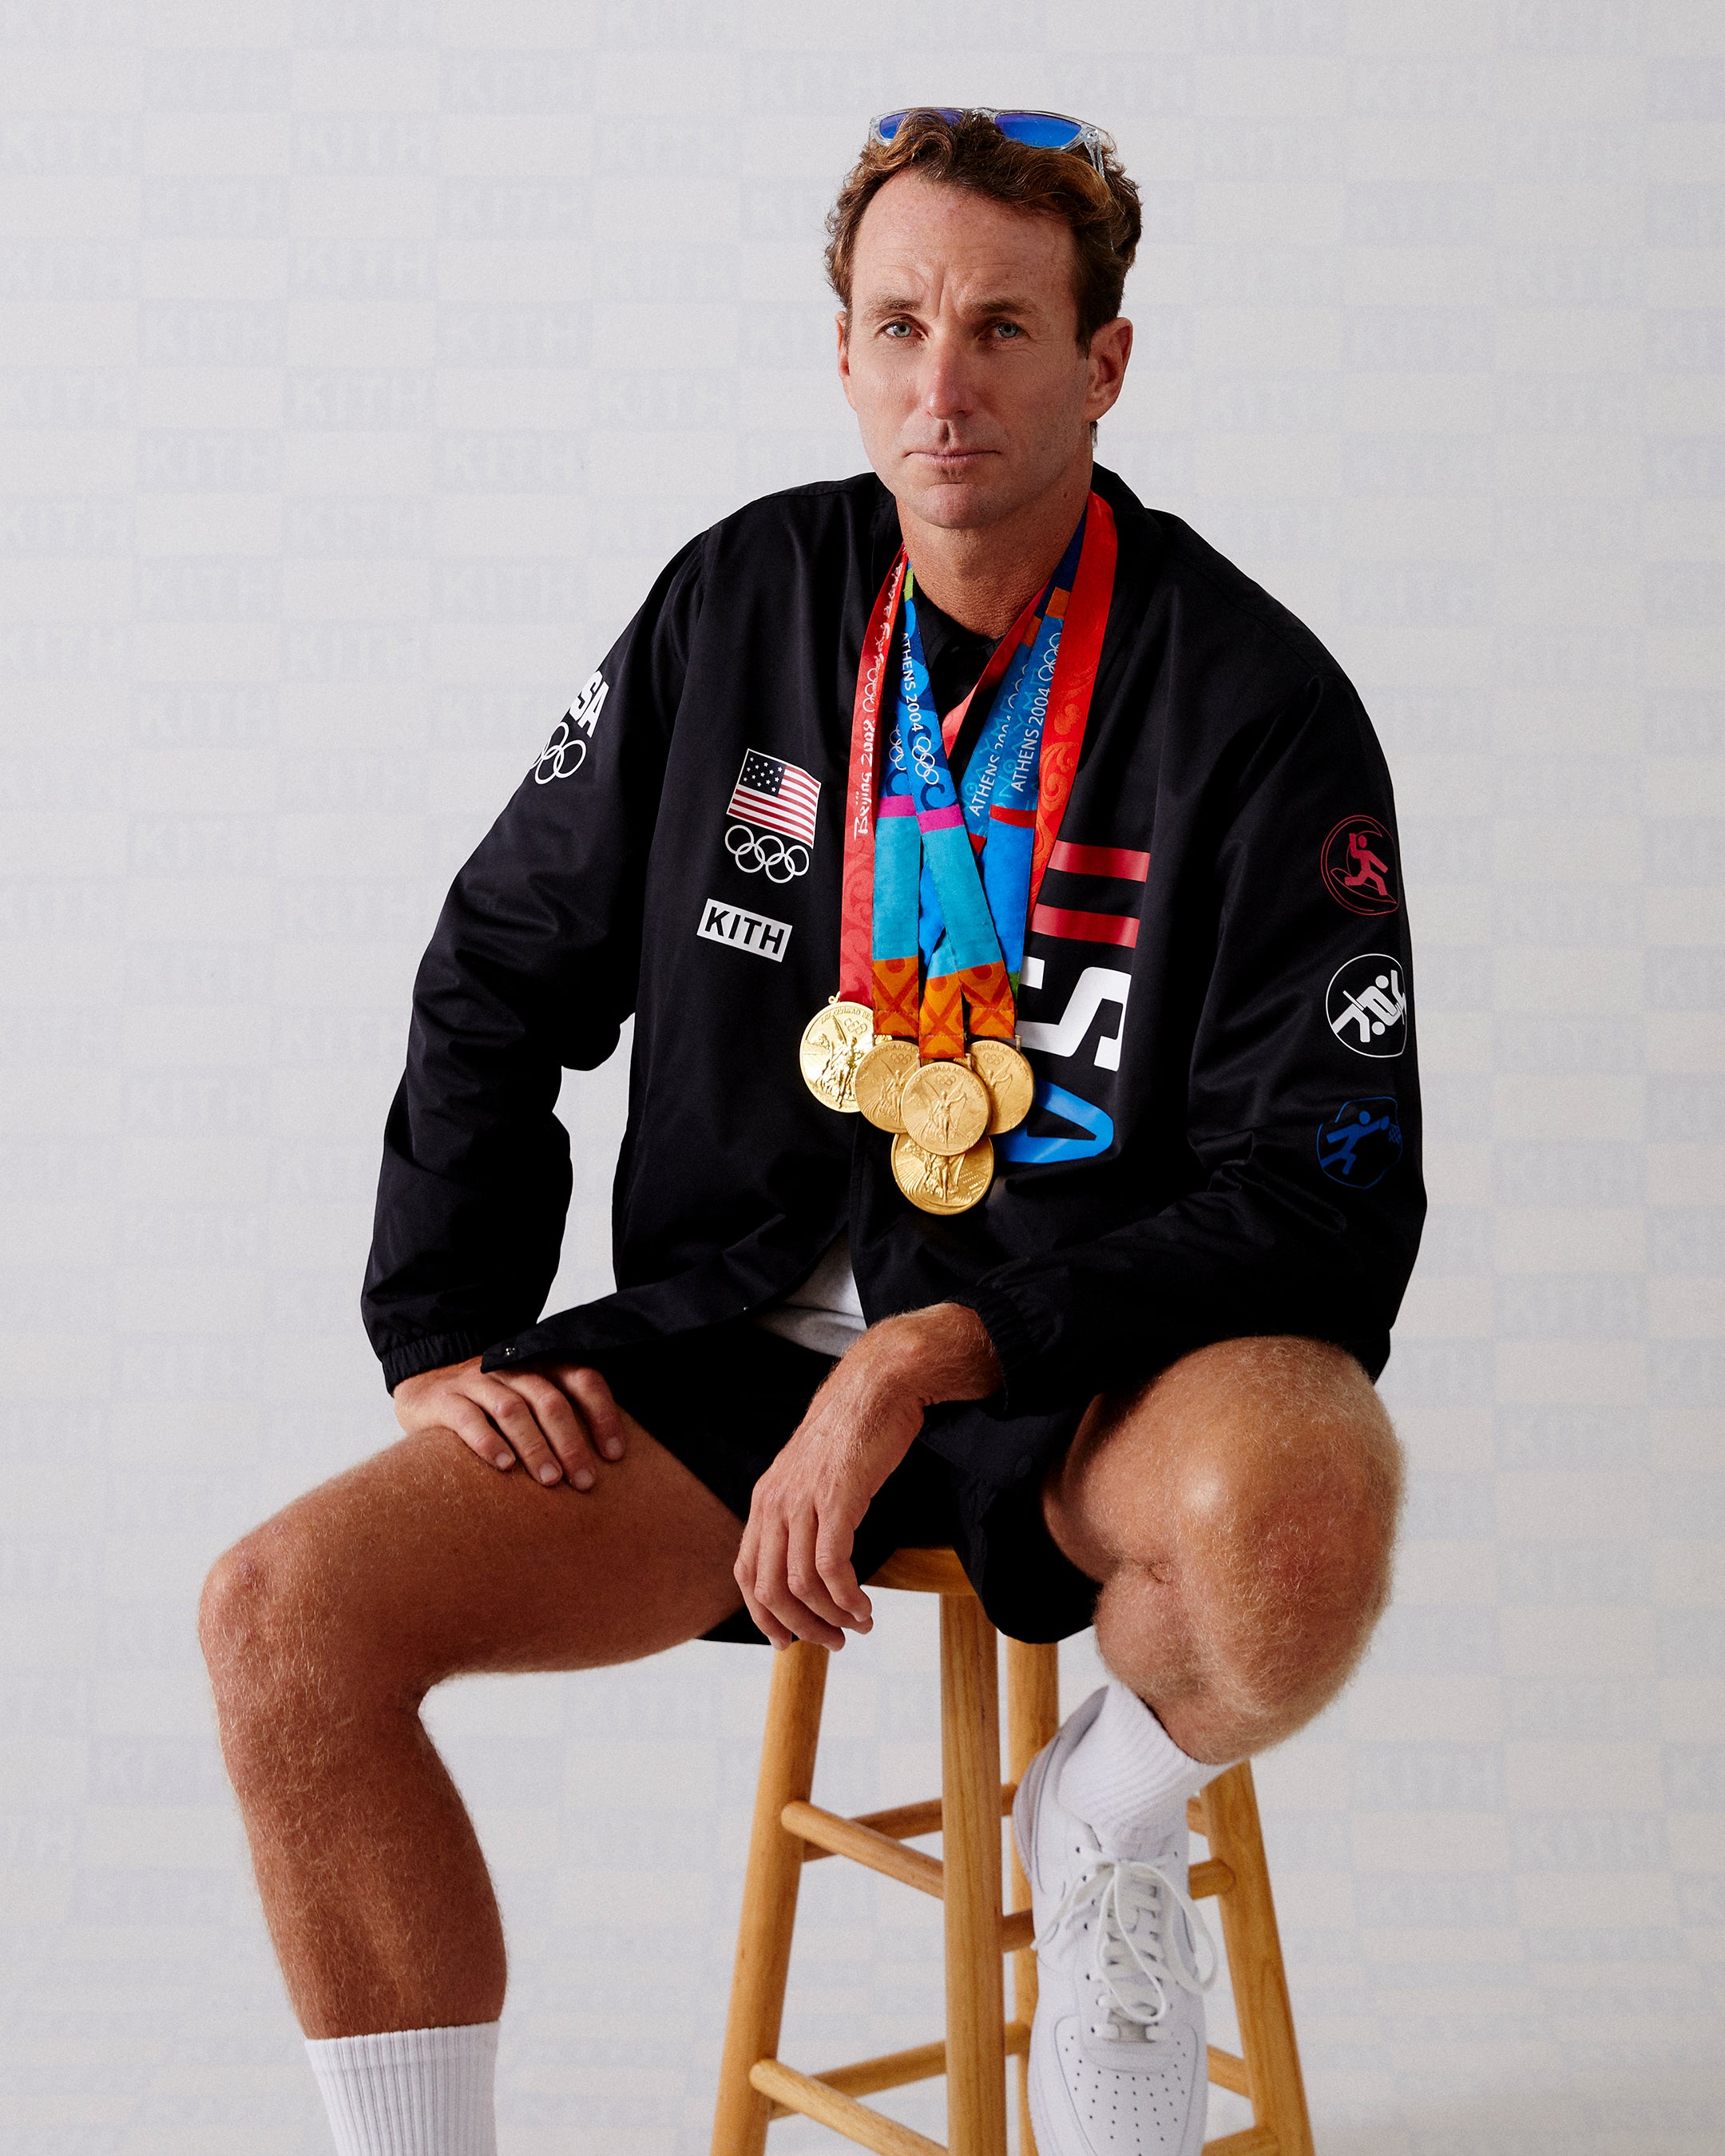 Kith for Team USA featuring Aaron Peirsol